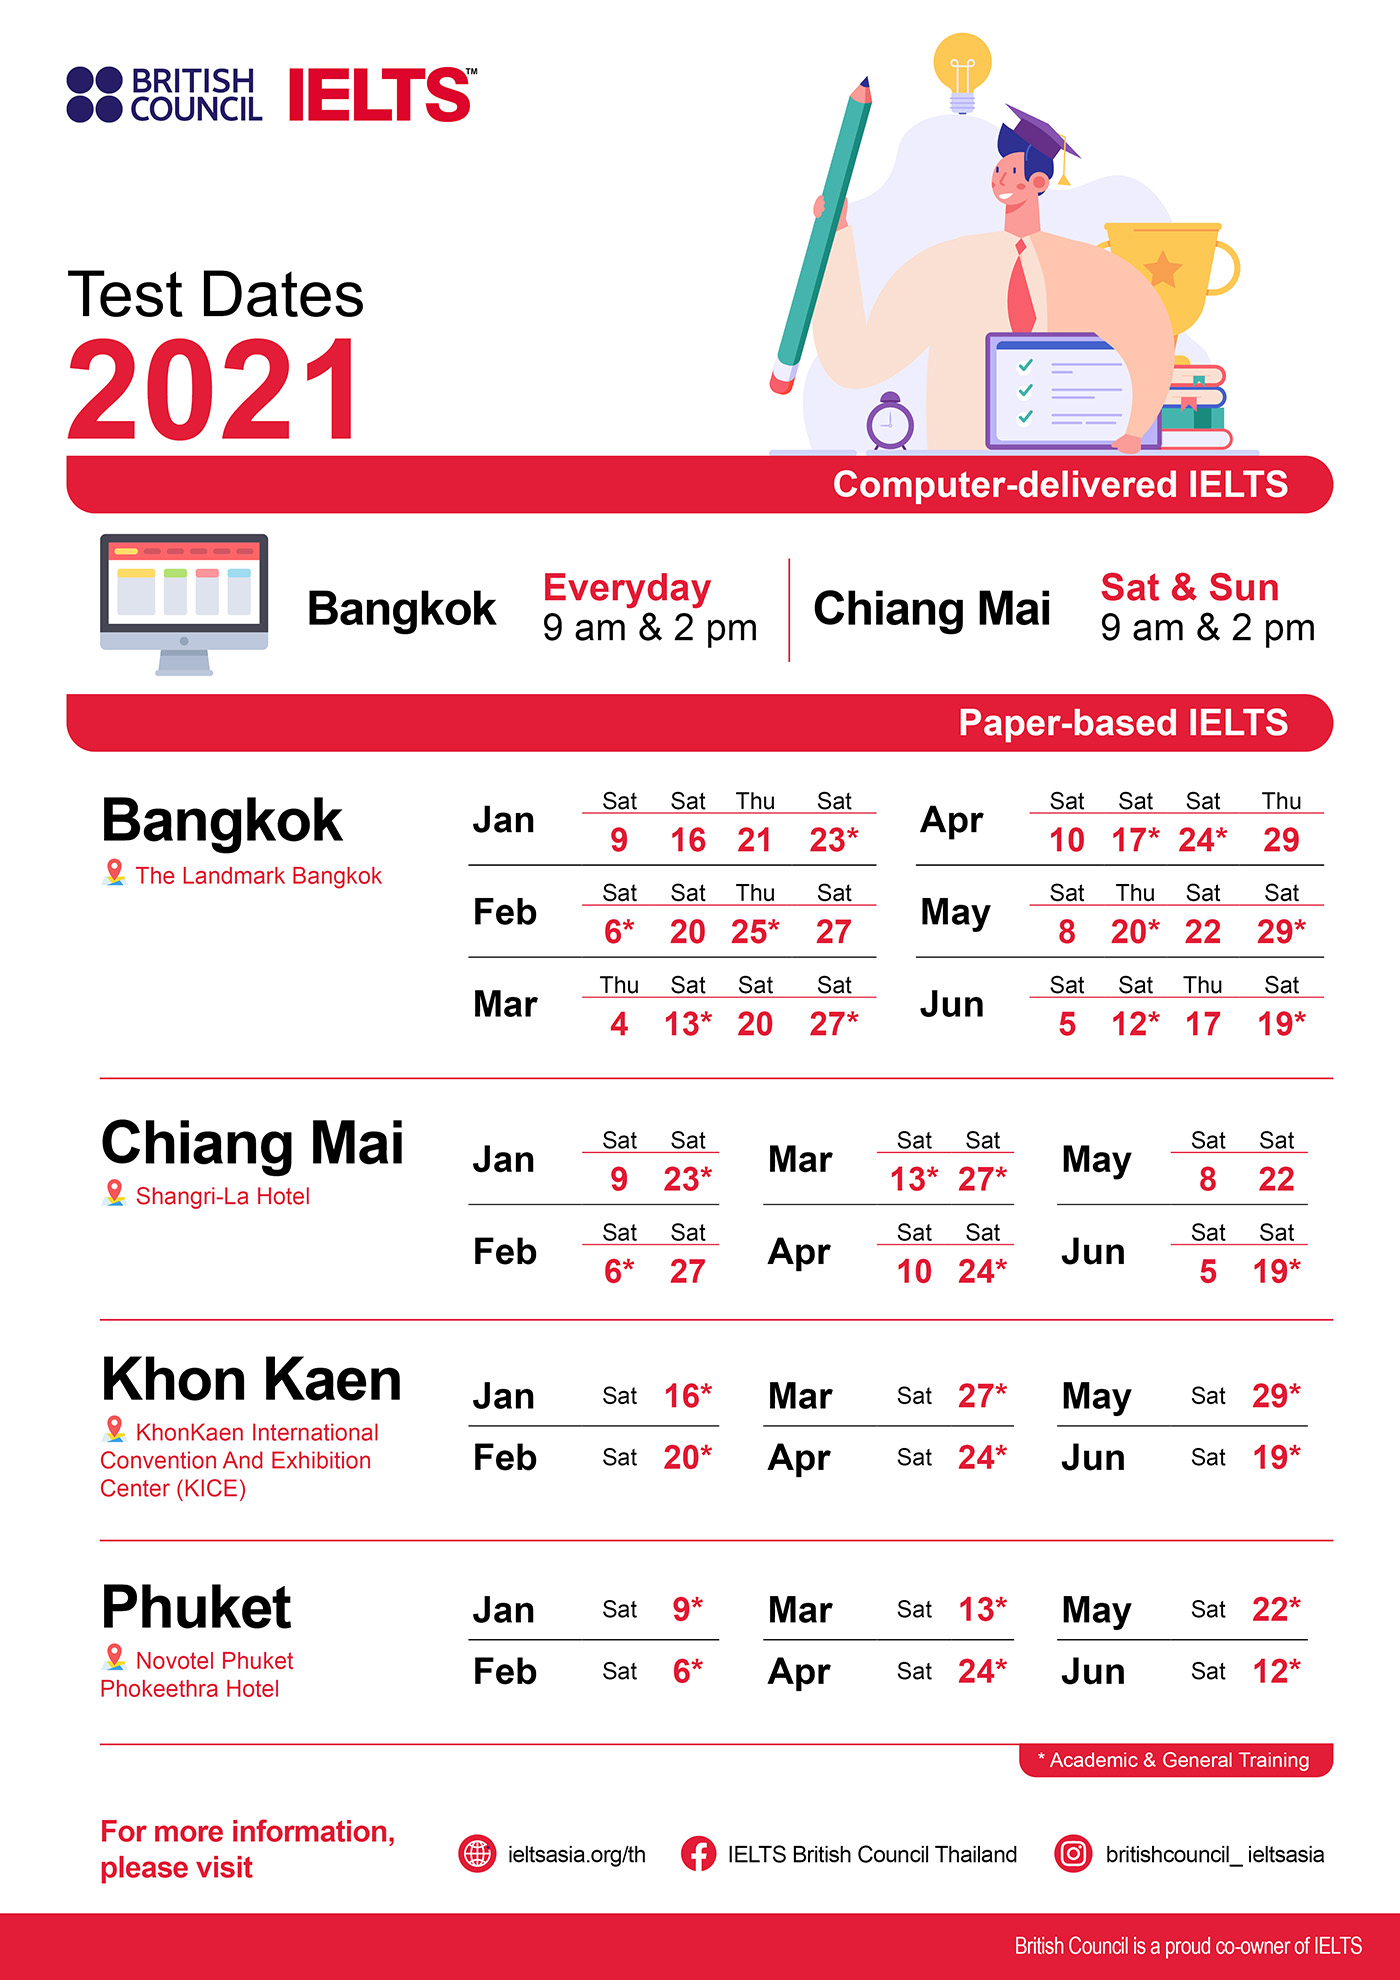 IELTS Asia Thailand Take IELTS with the British Council